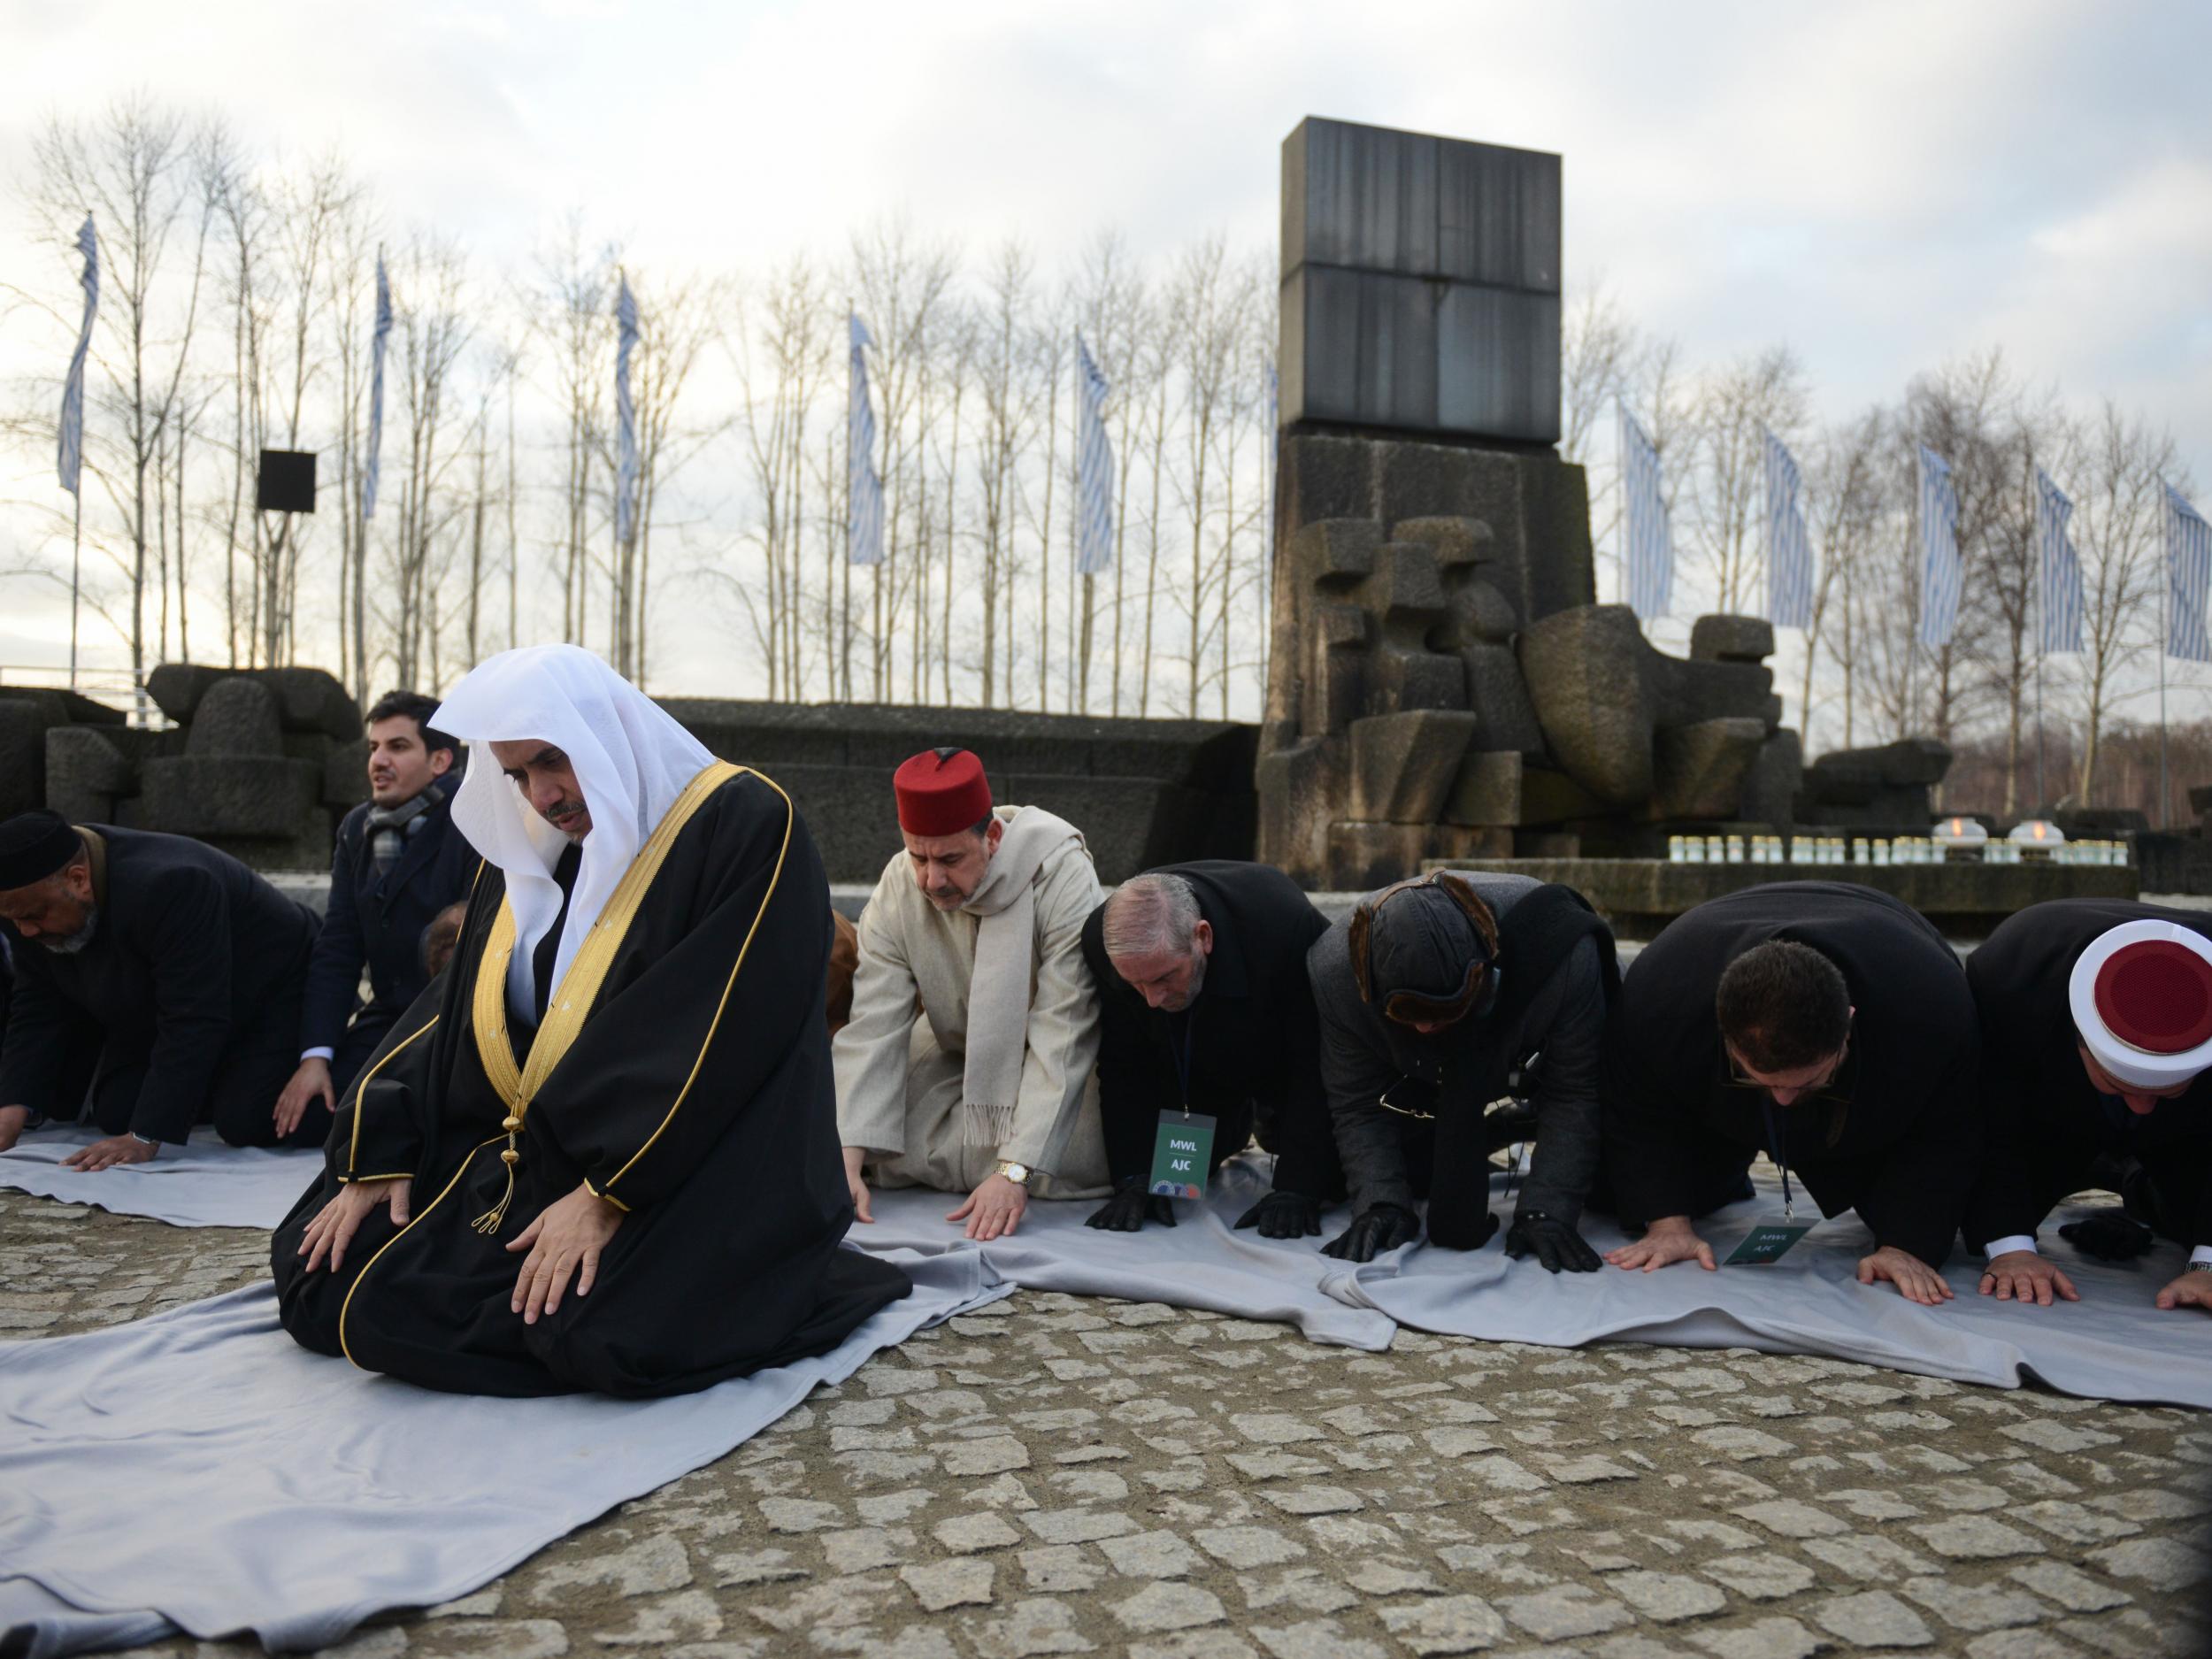 Muslim faith leaders perform Islamic prayers during a visit to Auschwitz